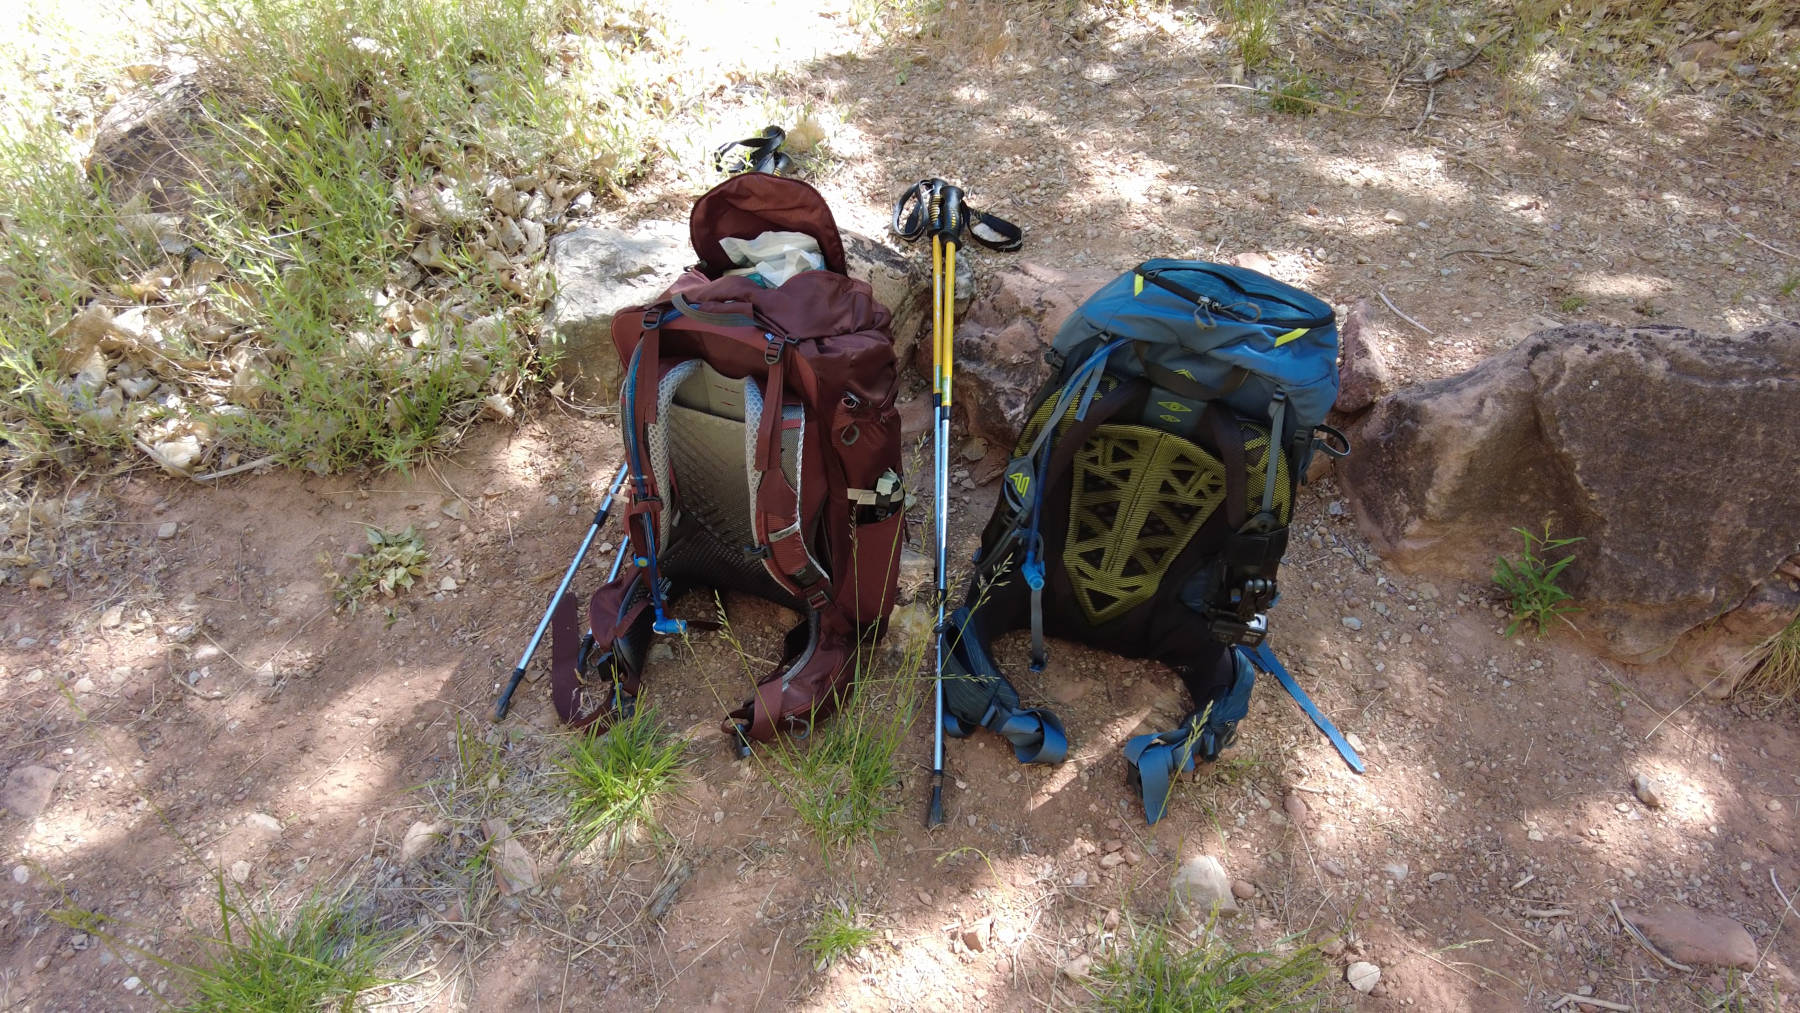 Andrew and Ashley's hiking backpacks used on the hike through the Grand Canyon